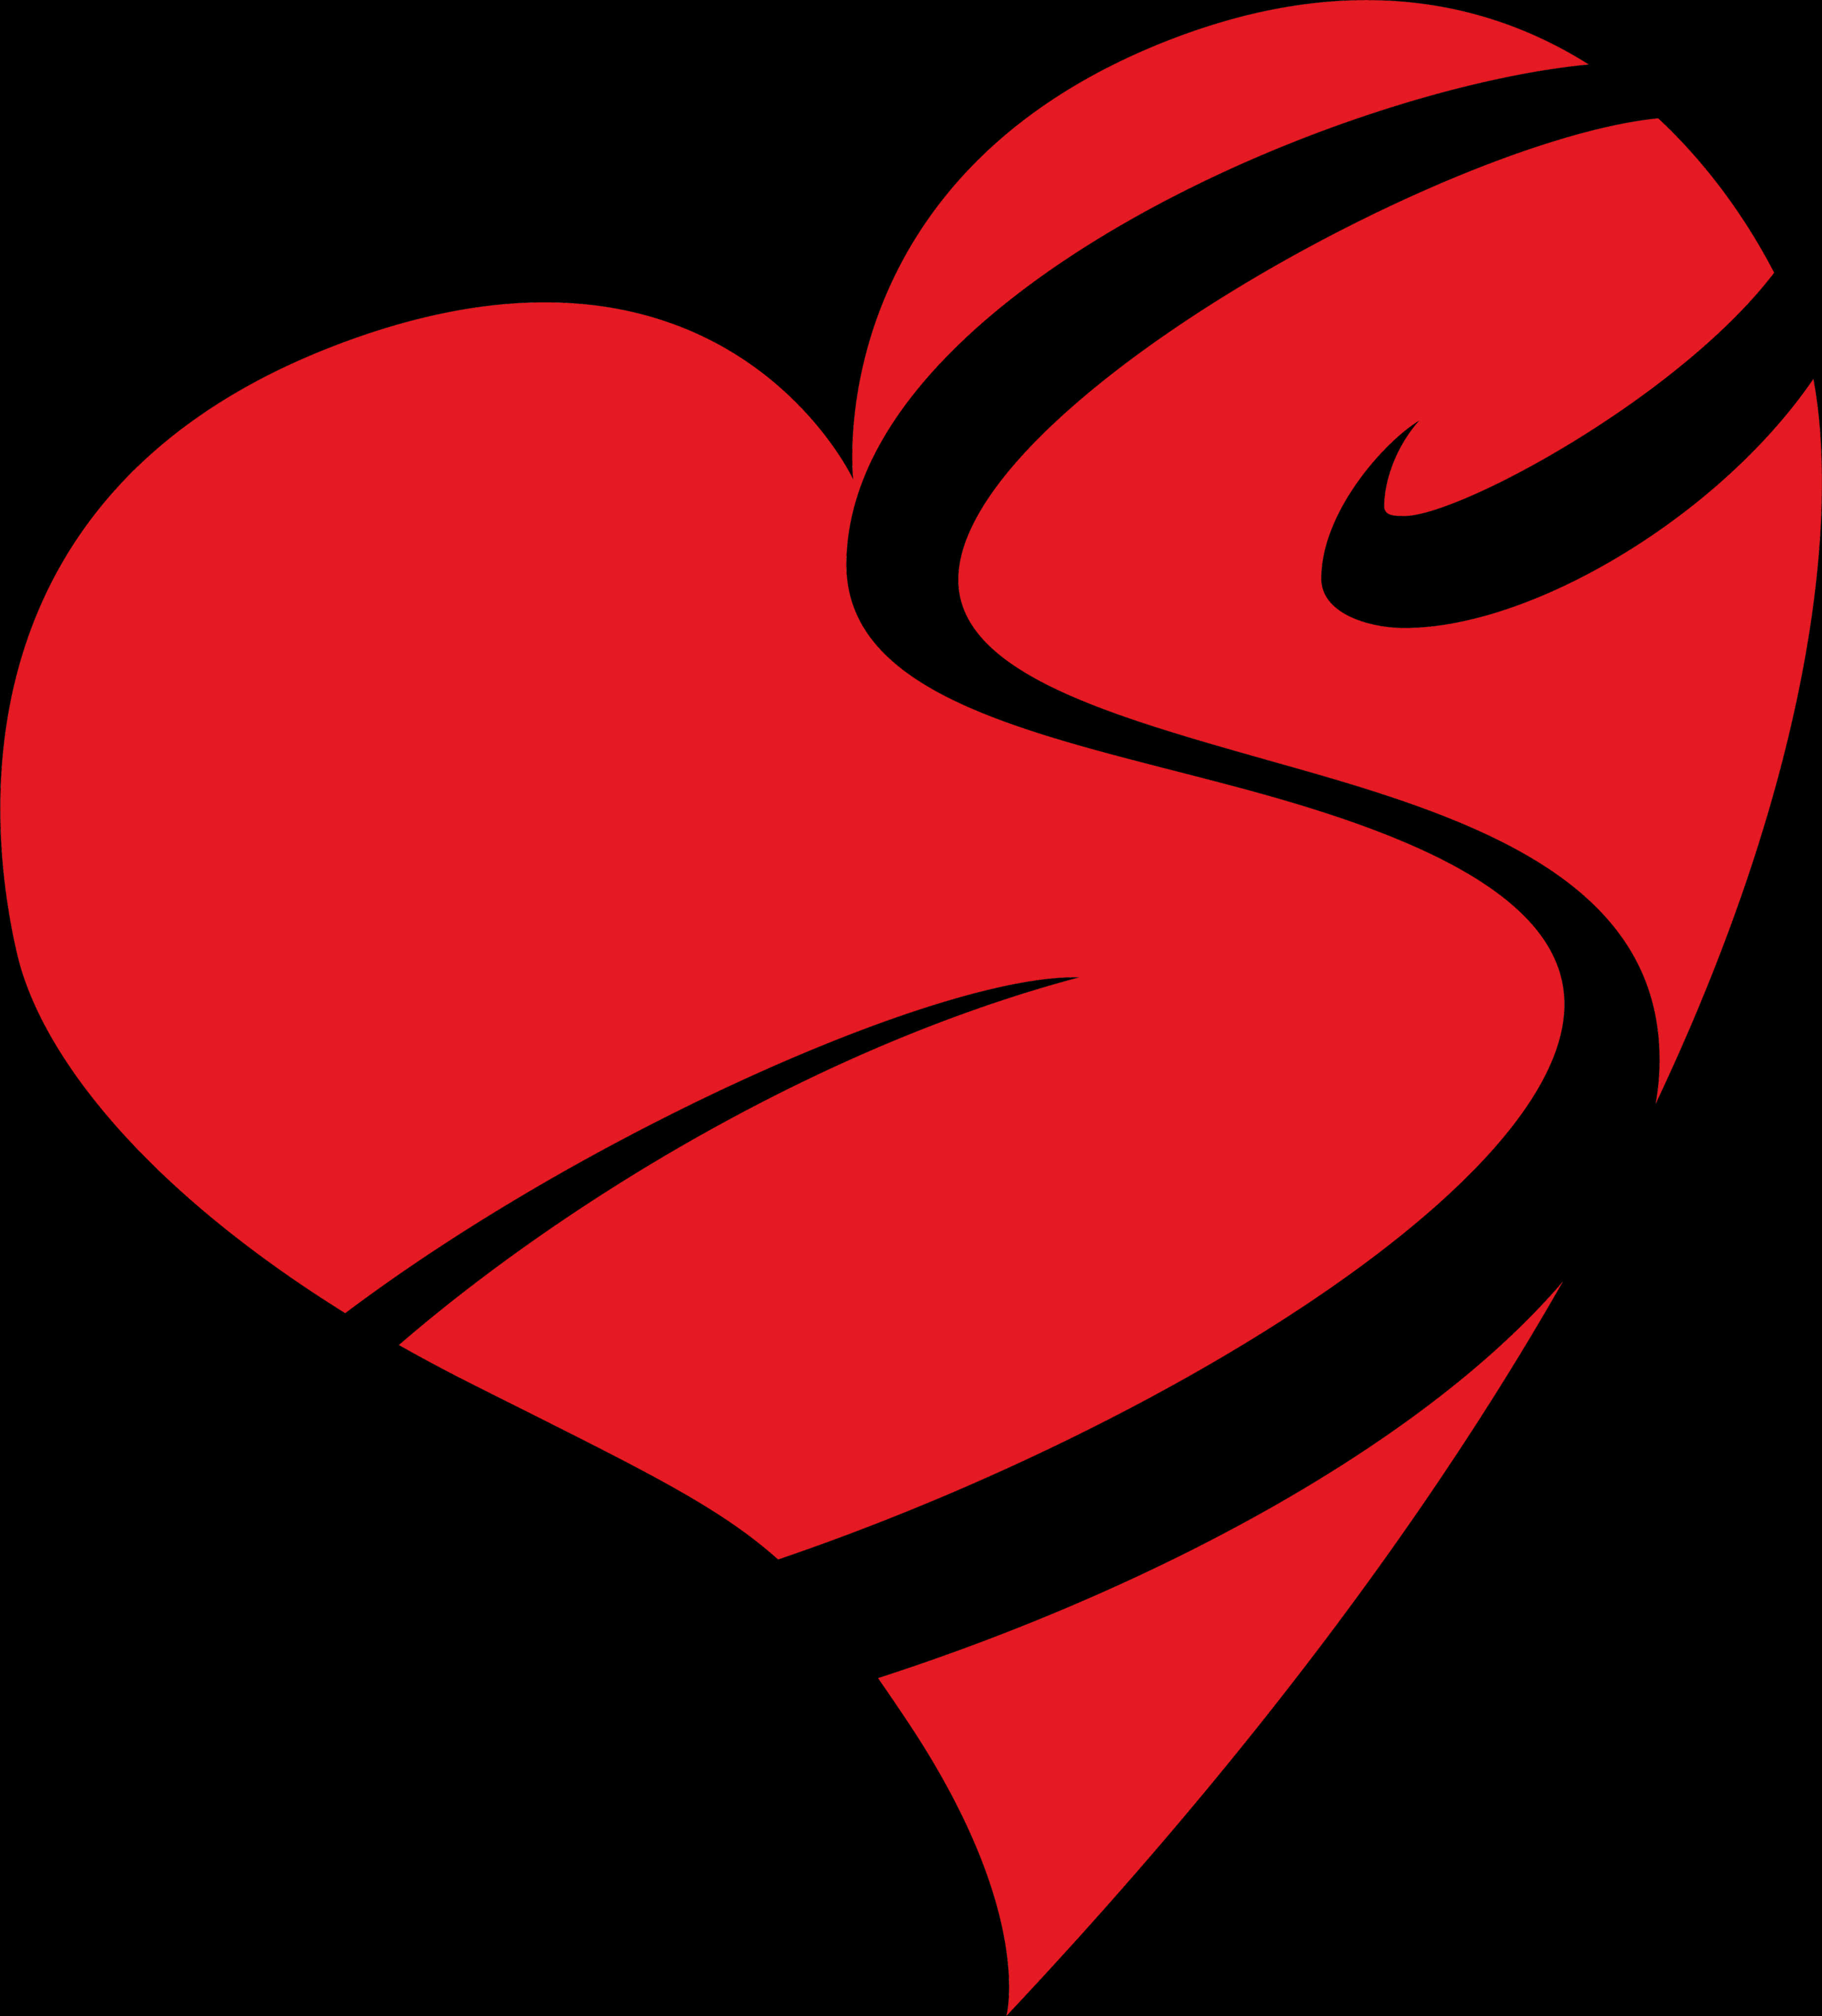 Stylized Red Heart Graphic PNG